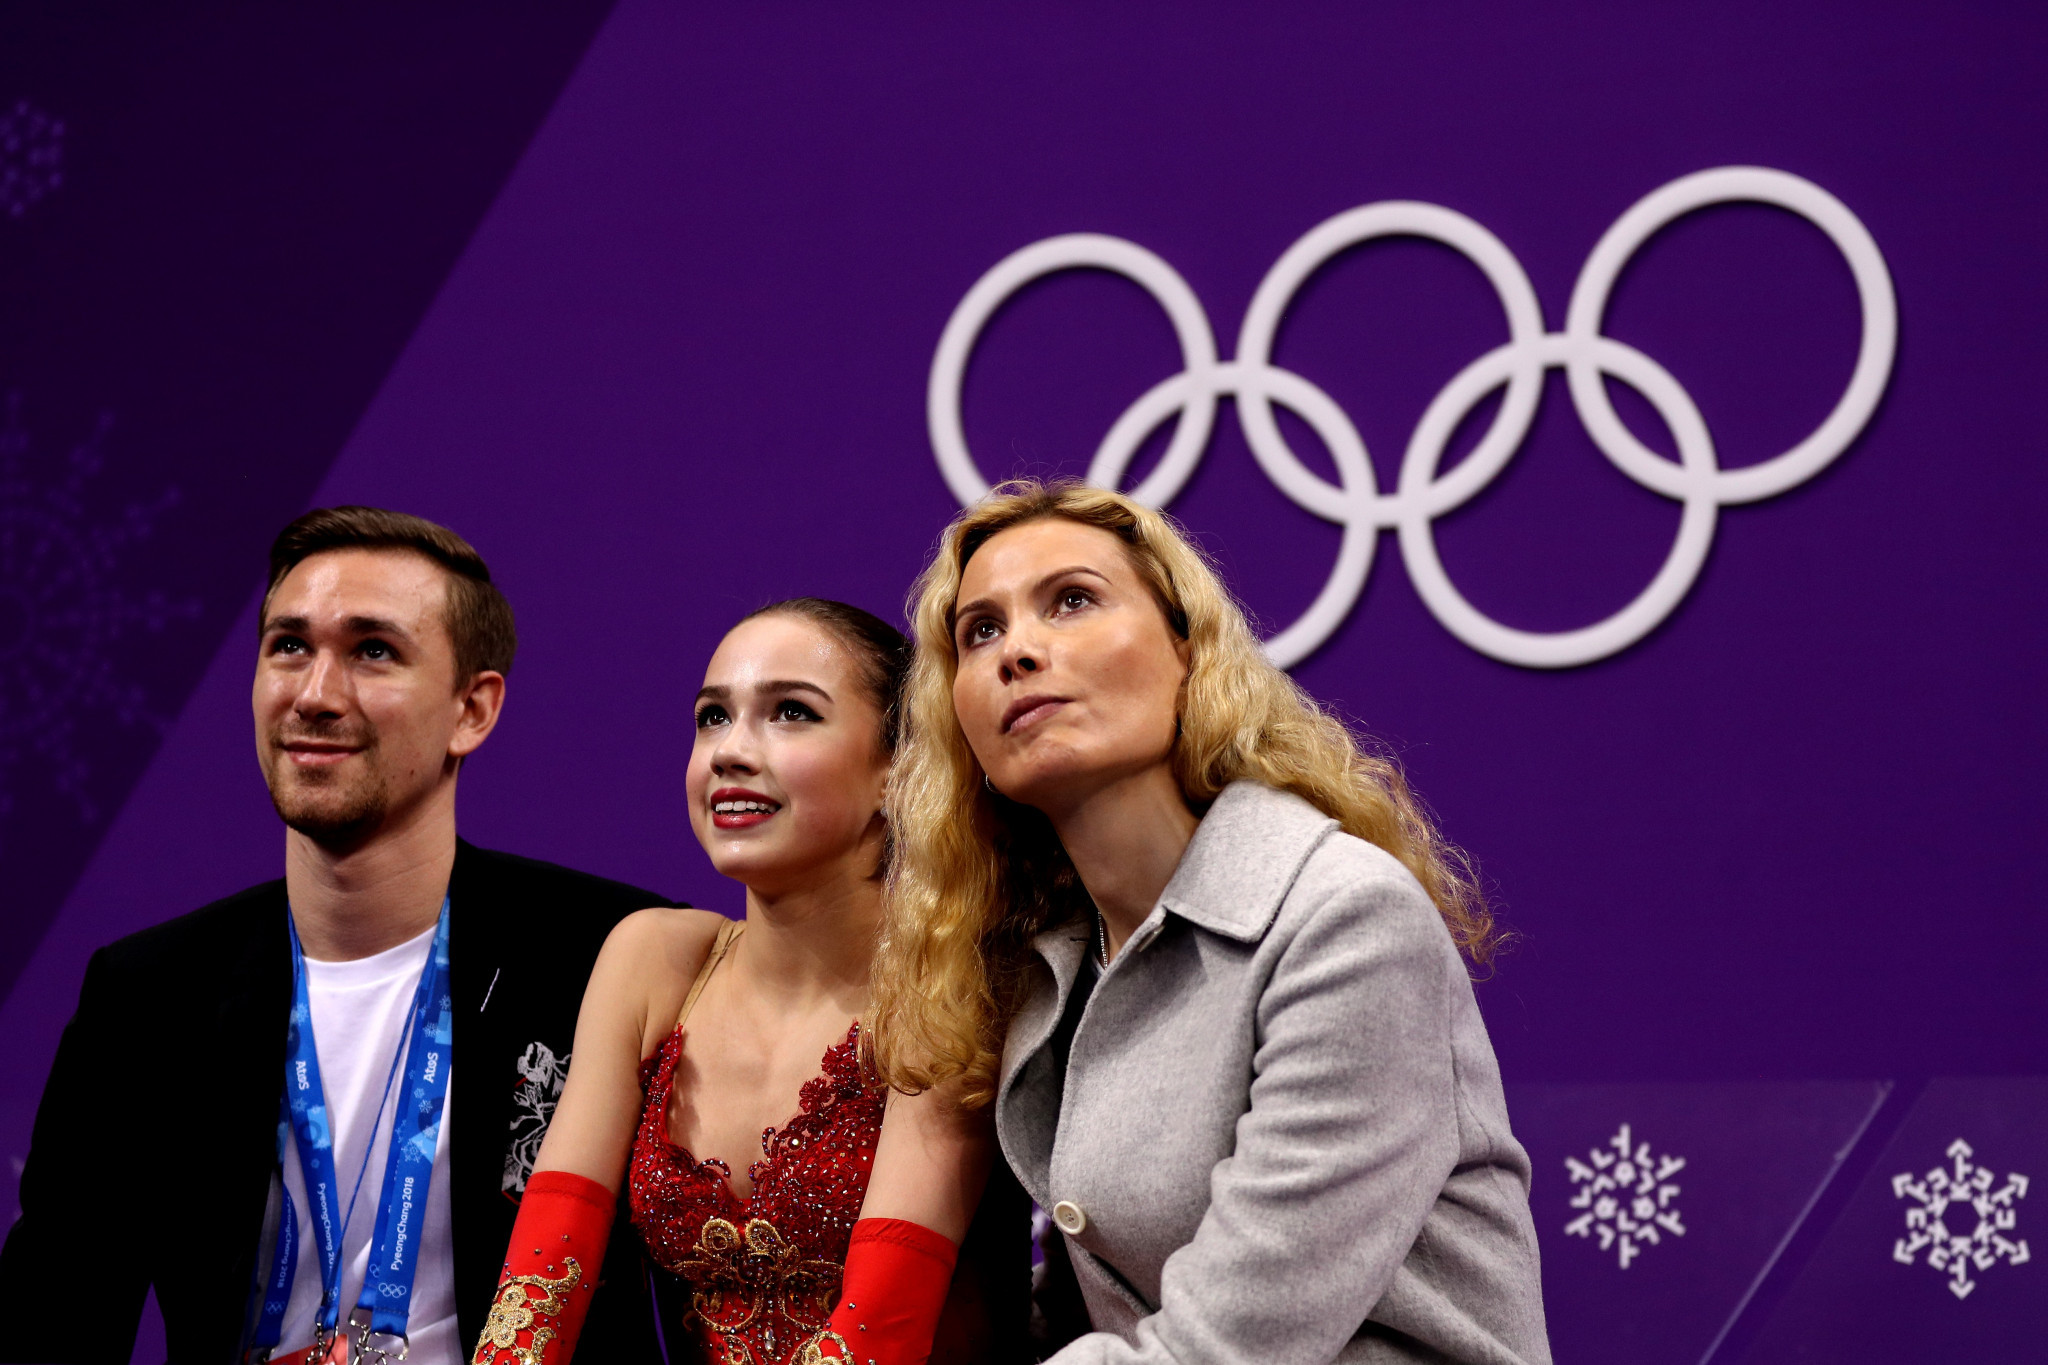 Coach Tutberidze joins Russian figure skaters at Novogorsk training camp